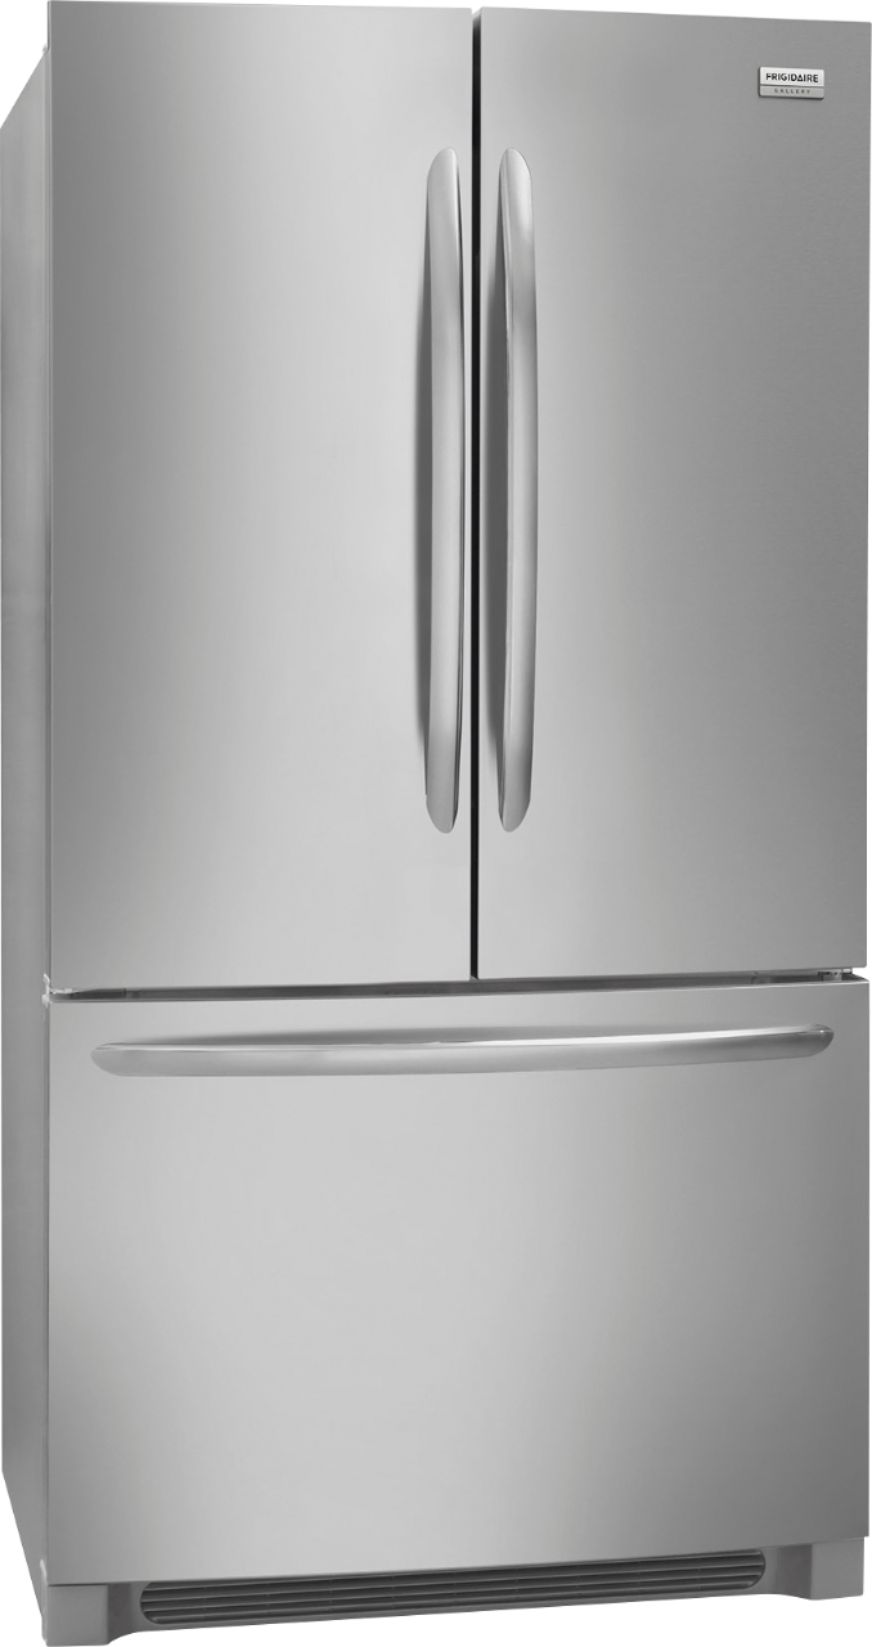 Angle View: Frigidaire - Gallery 27.6 Cu. Ft. French Door Refrigerator - Stainless steel